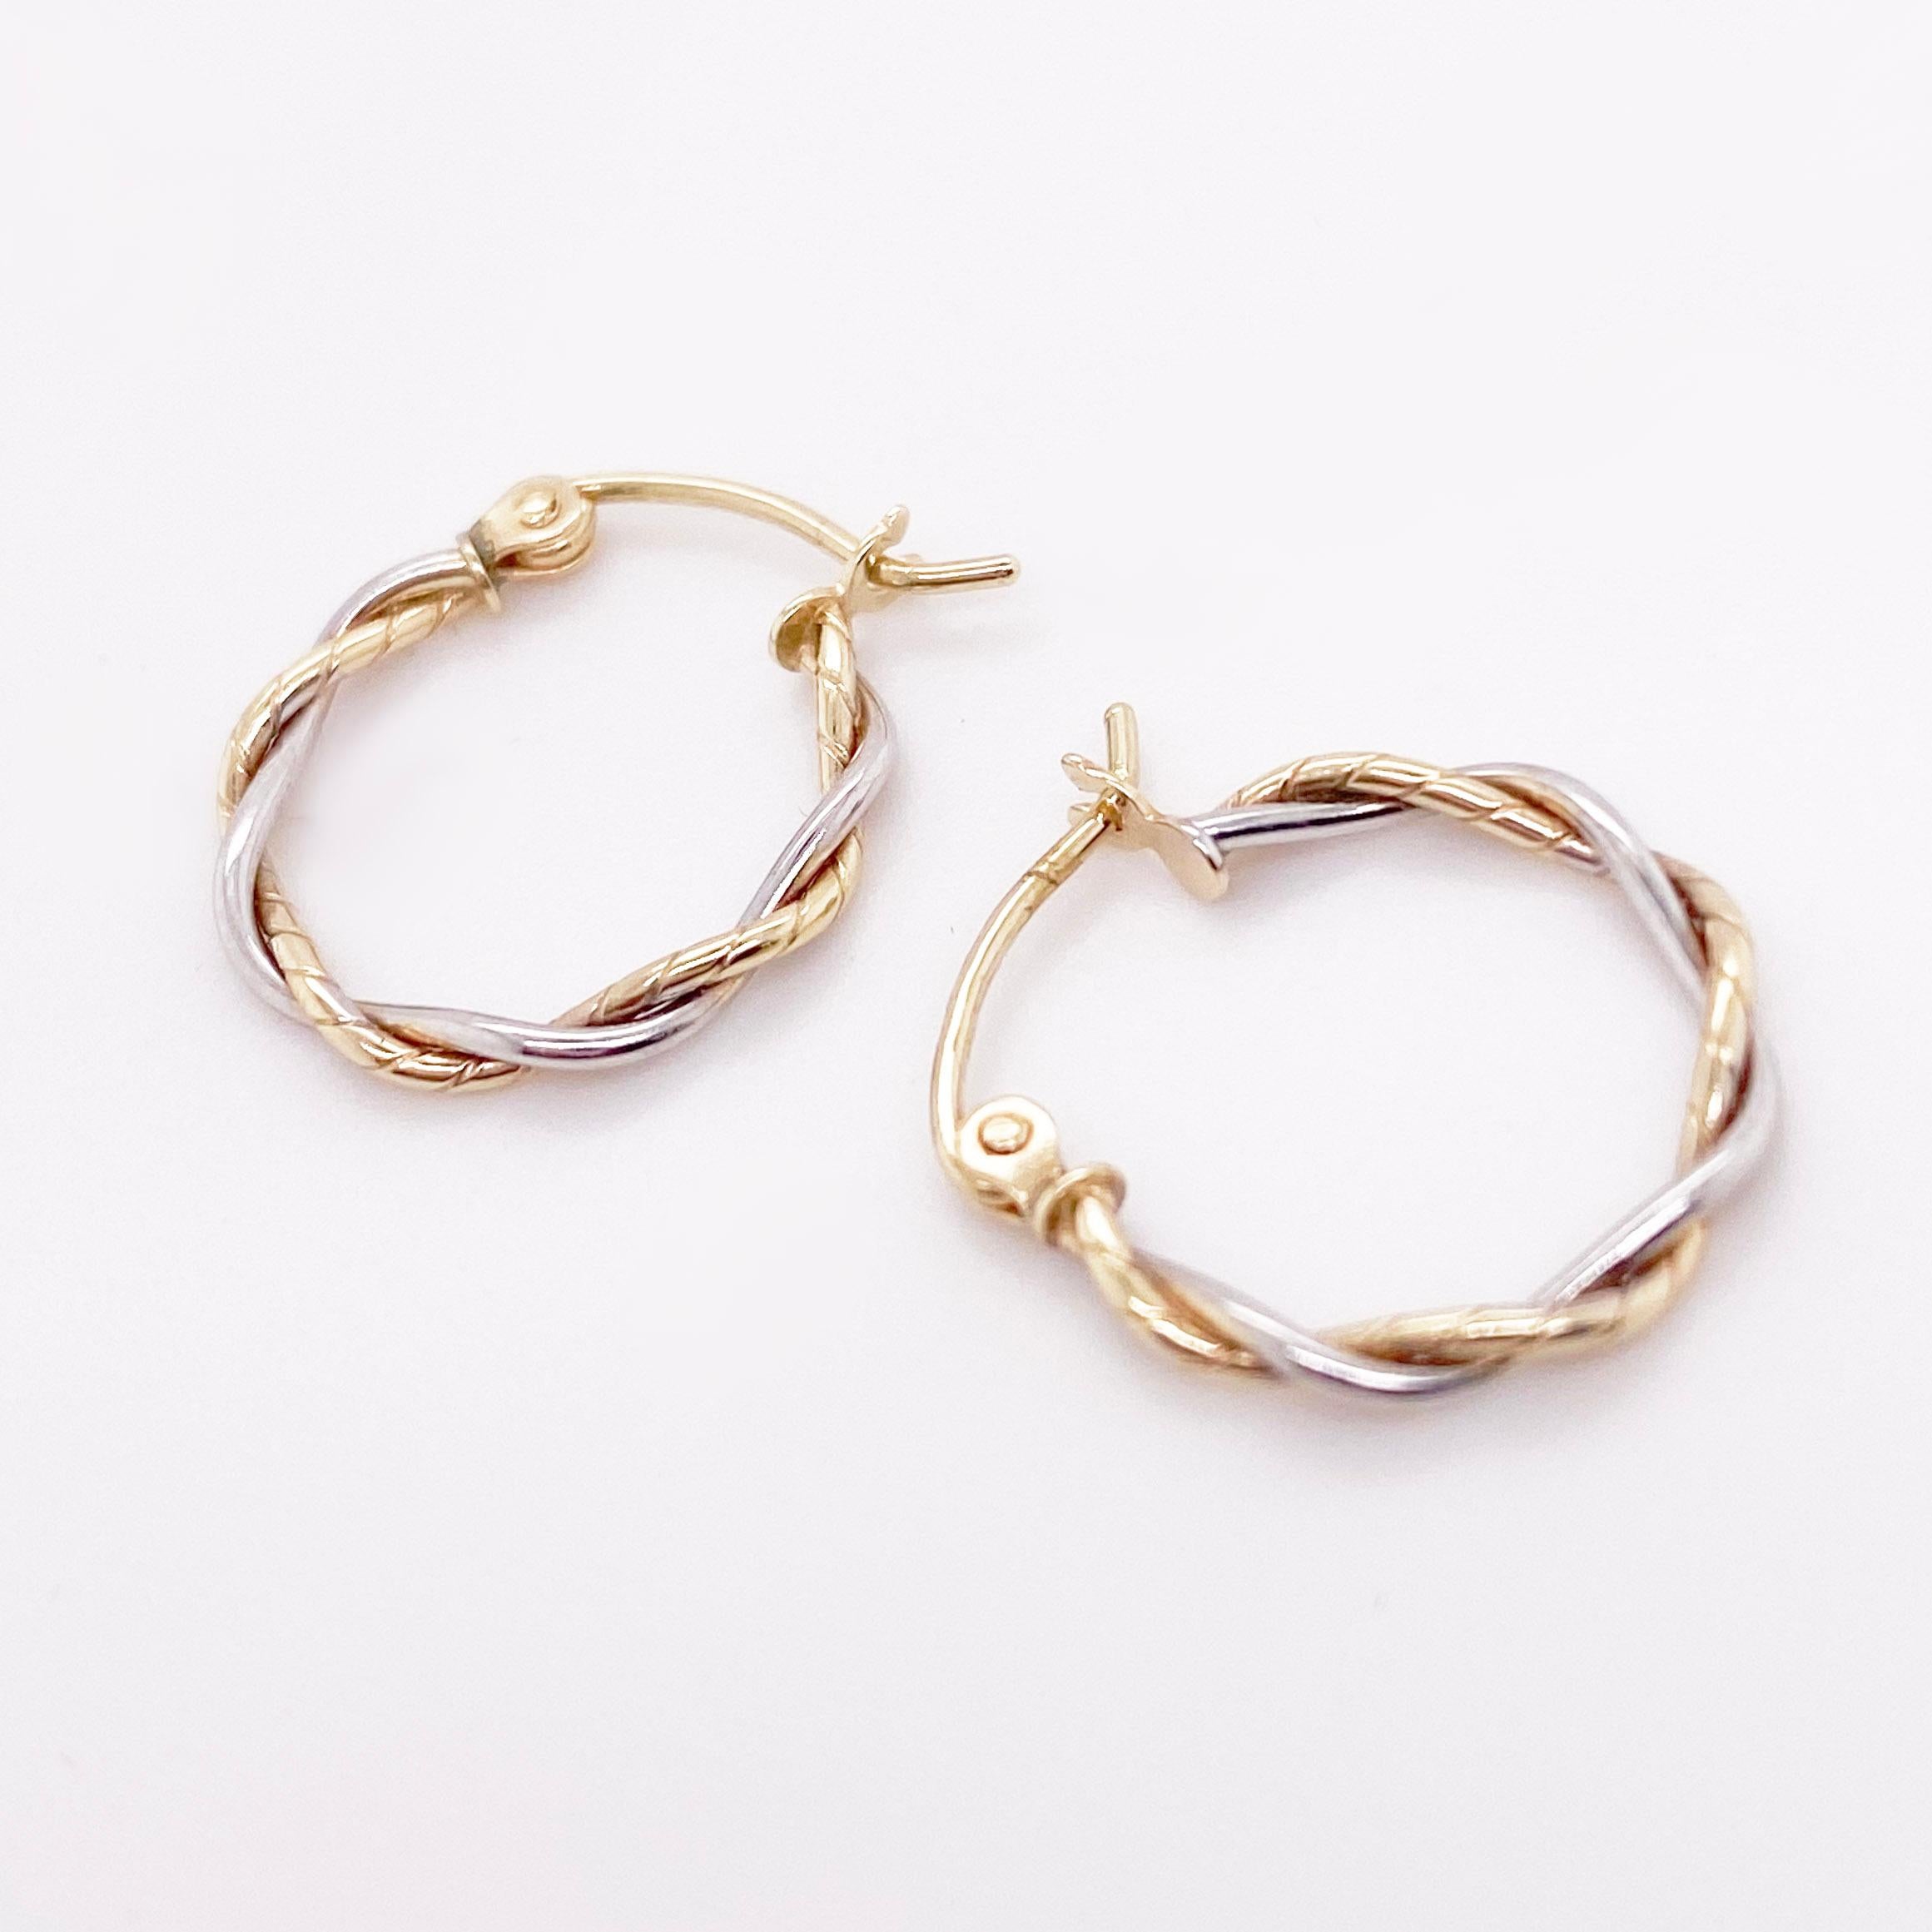 Gold hoop earrings are a staple in fine jewelry! These classic earrings are timeless and upgrade any outfit! The 14 karat yellow gold and white gold hoops are lightweight and comfortable to wear. They have a high polish finish mixed with a twisted